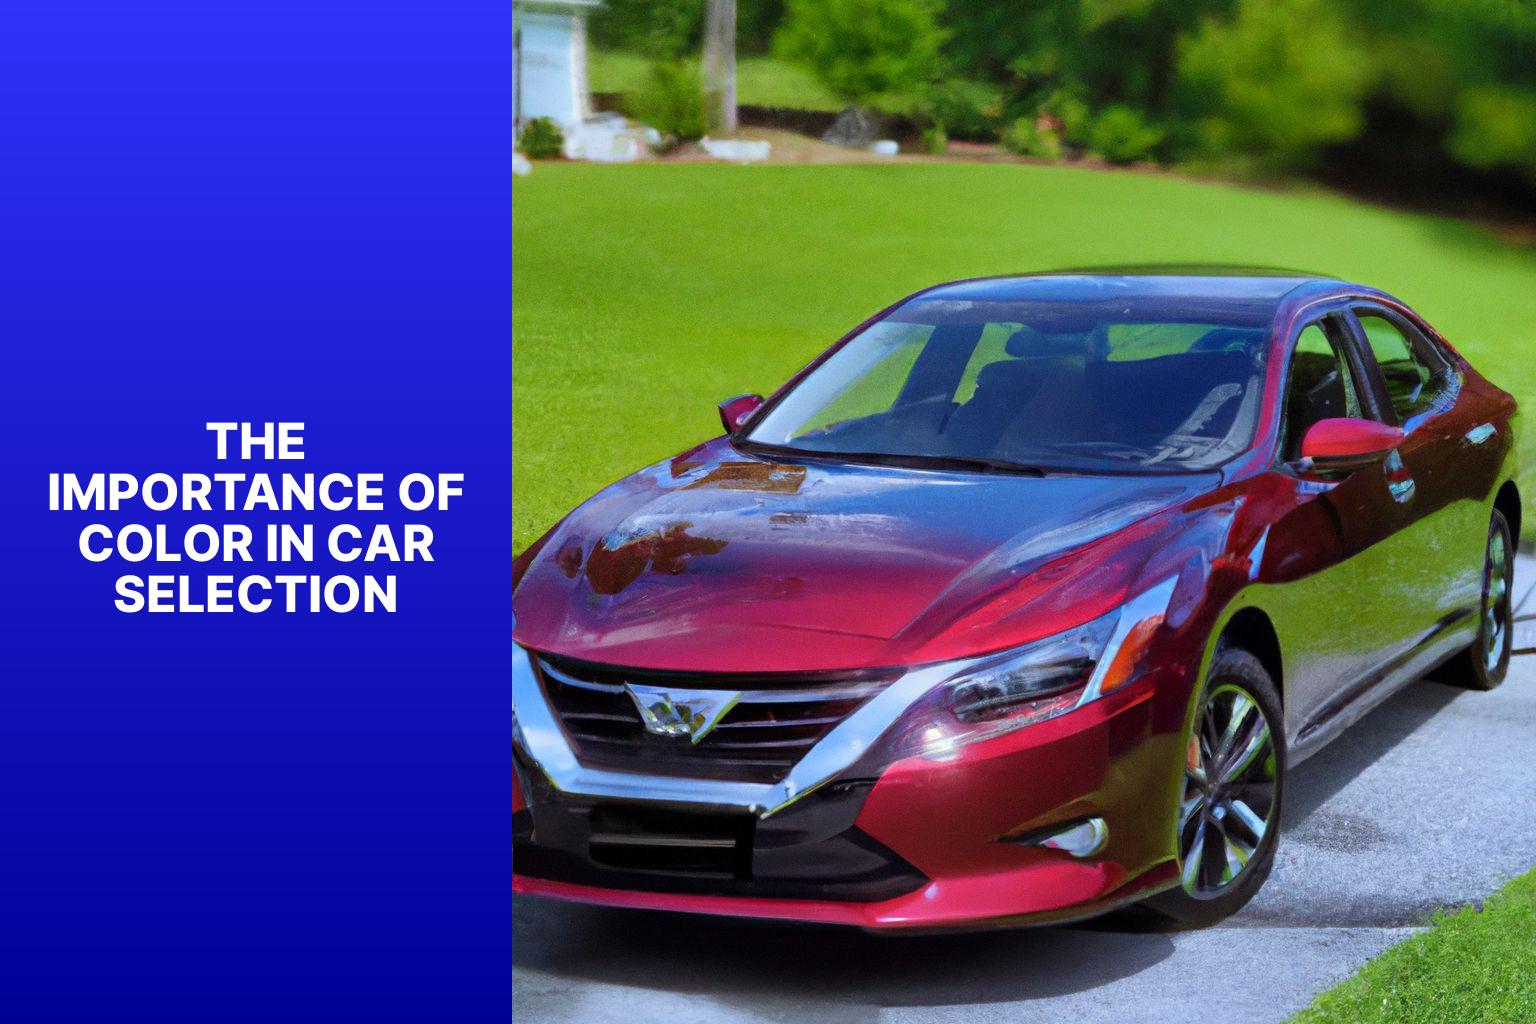 The Importance of Color in Car Selection - Expressing Style: 2020 Nissan Altima Color Options 